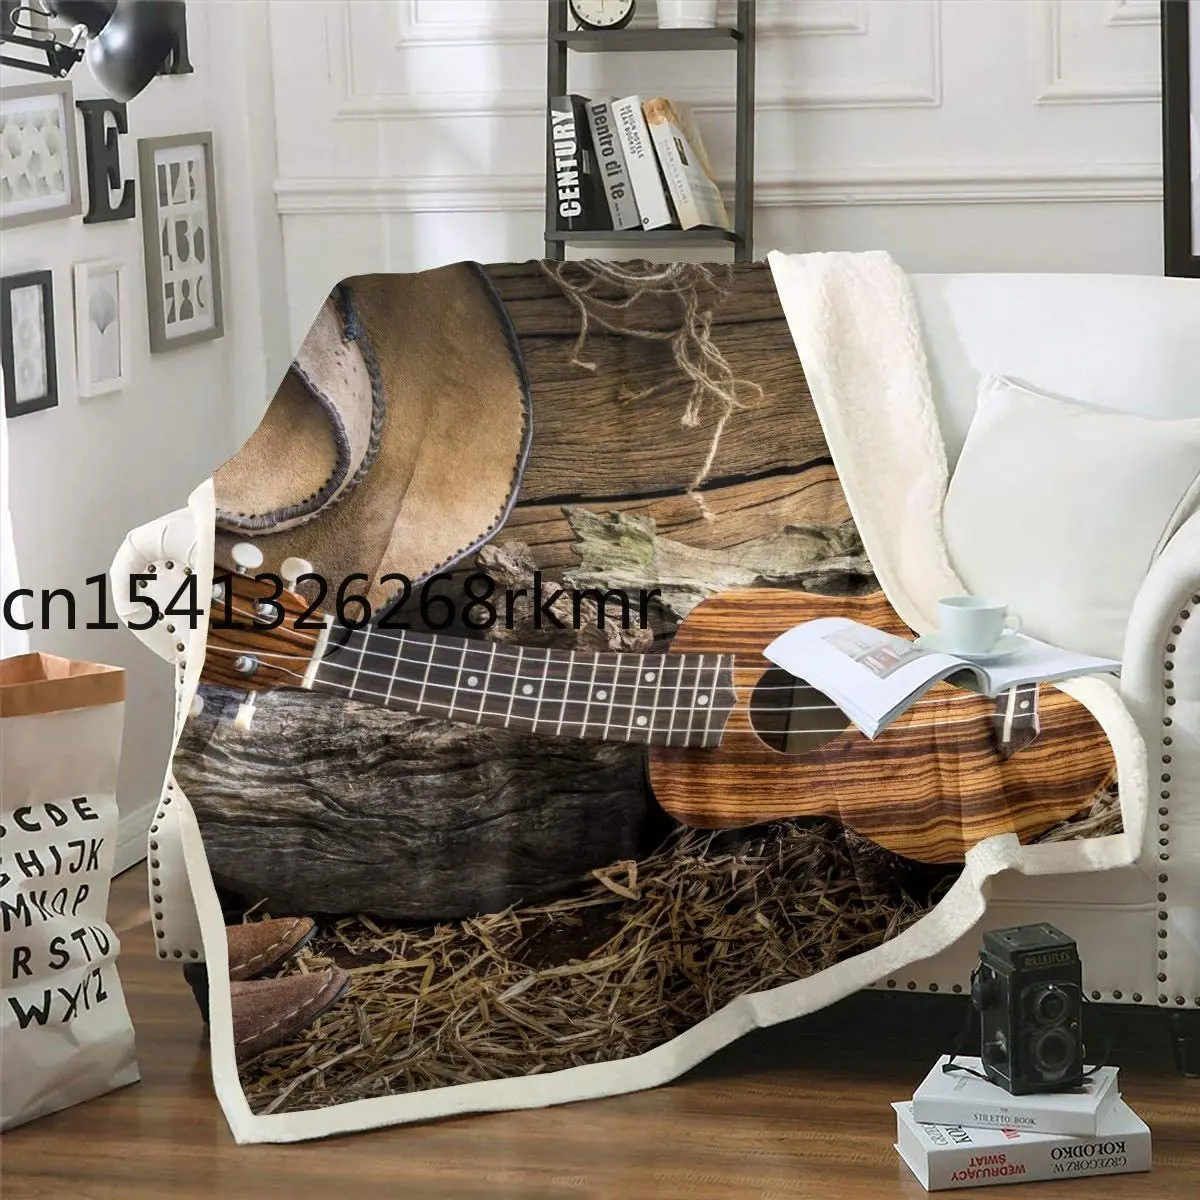 

Feelyou Western Cowboy Fleece Blanket Music Themed Guitar Sherpa Throw Blanket for Couch Sofa Wild West Themed Plush Blanket